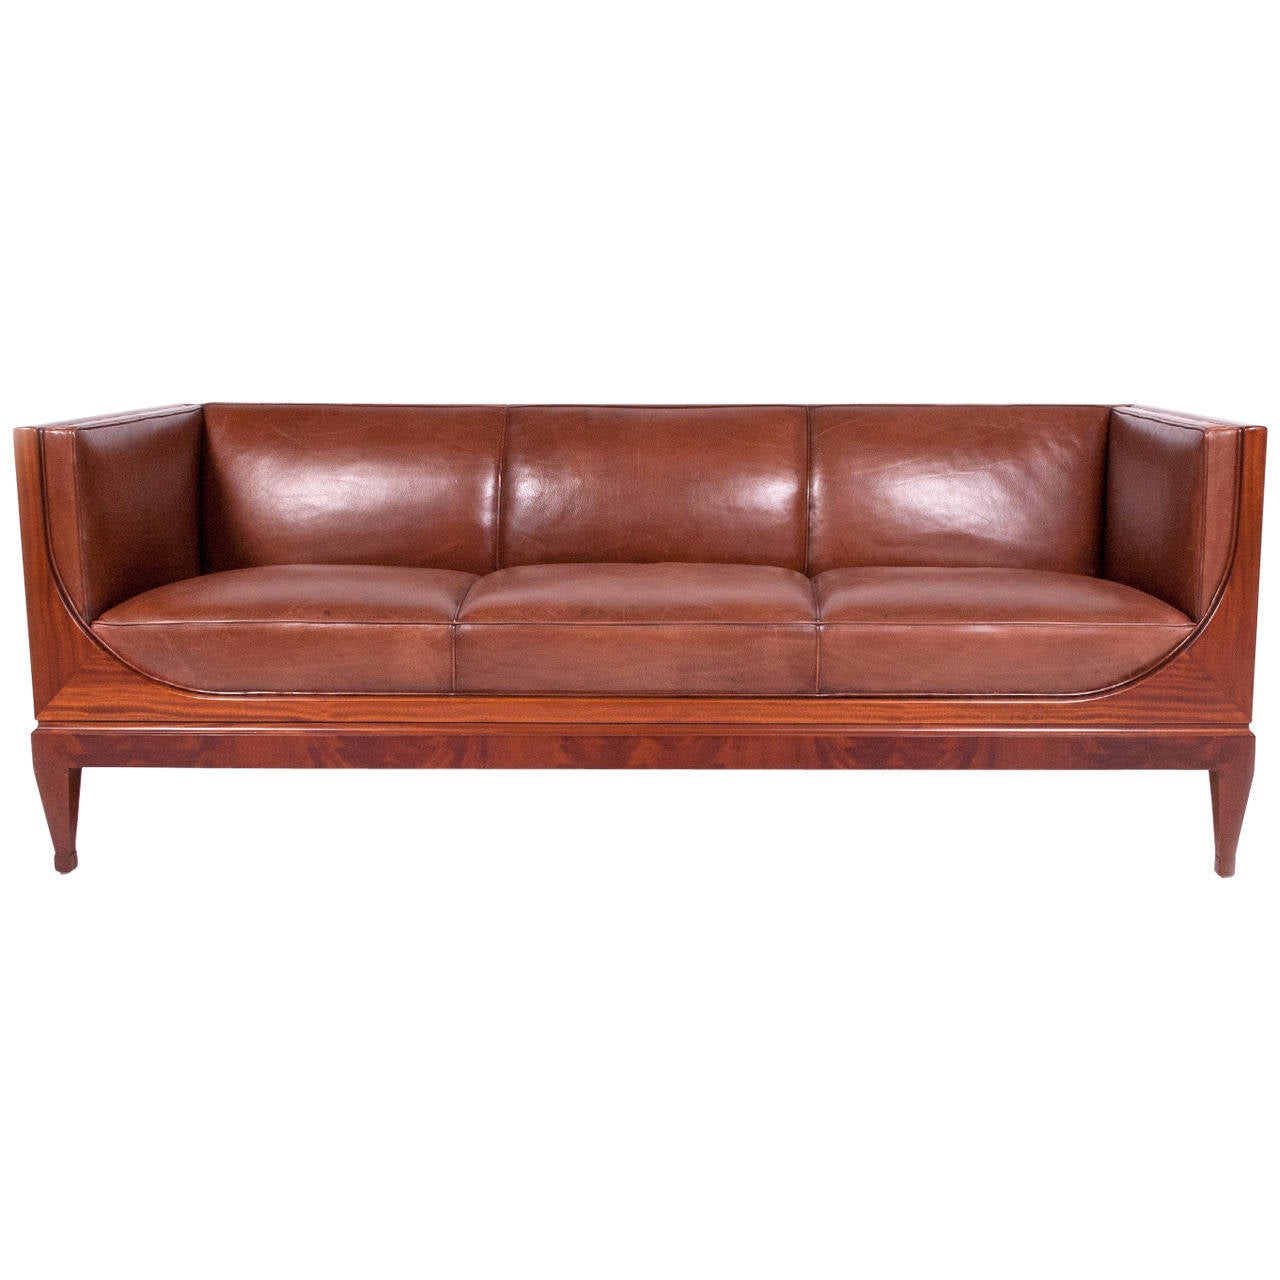 Frits Henningsen sofa, 1930s, offered by Collage 20th Century Classics